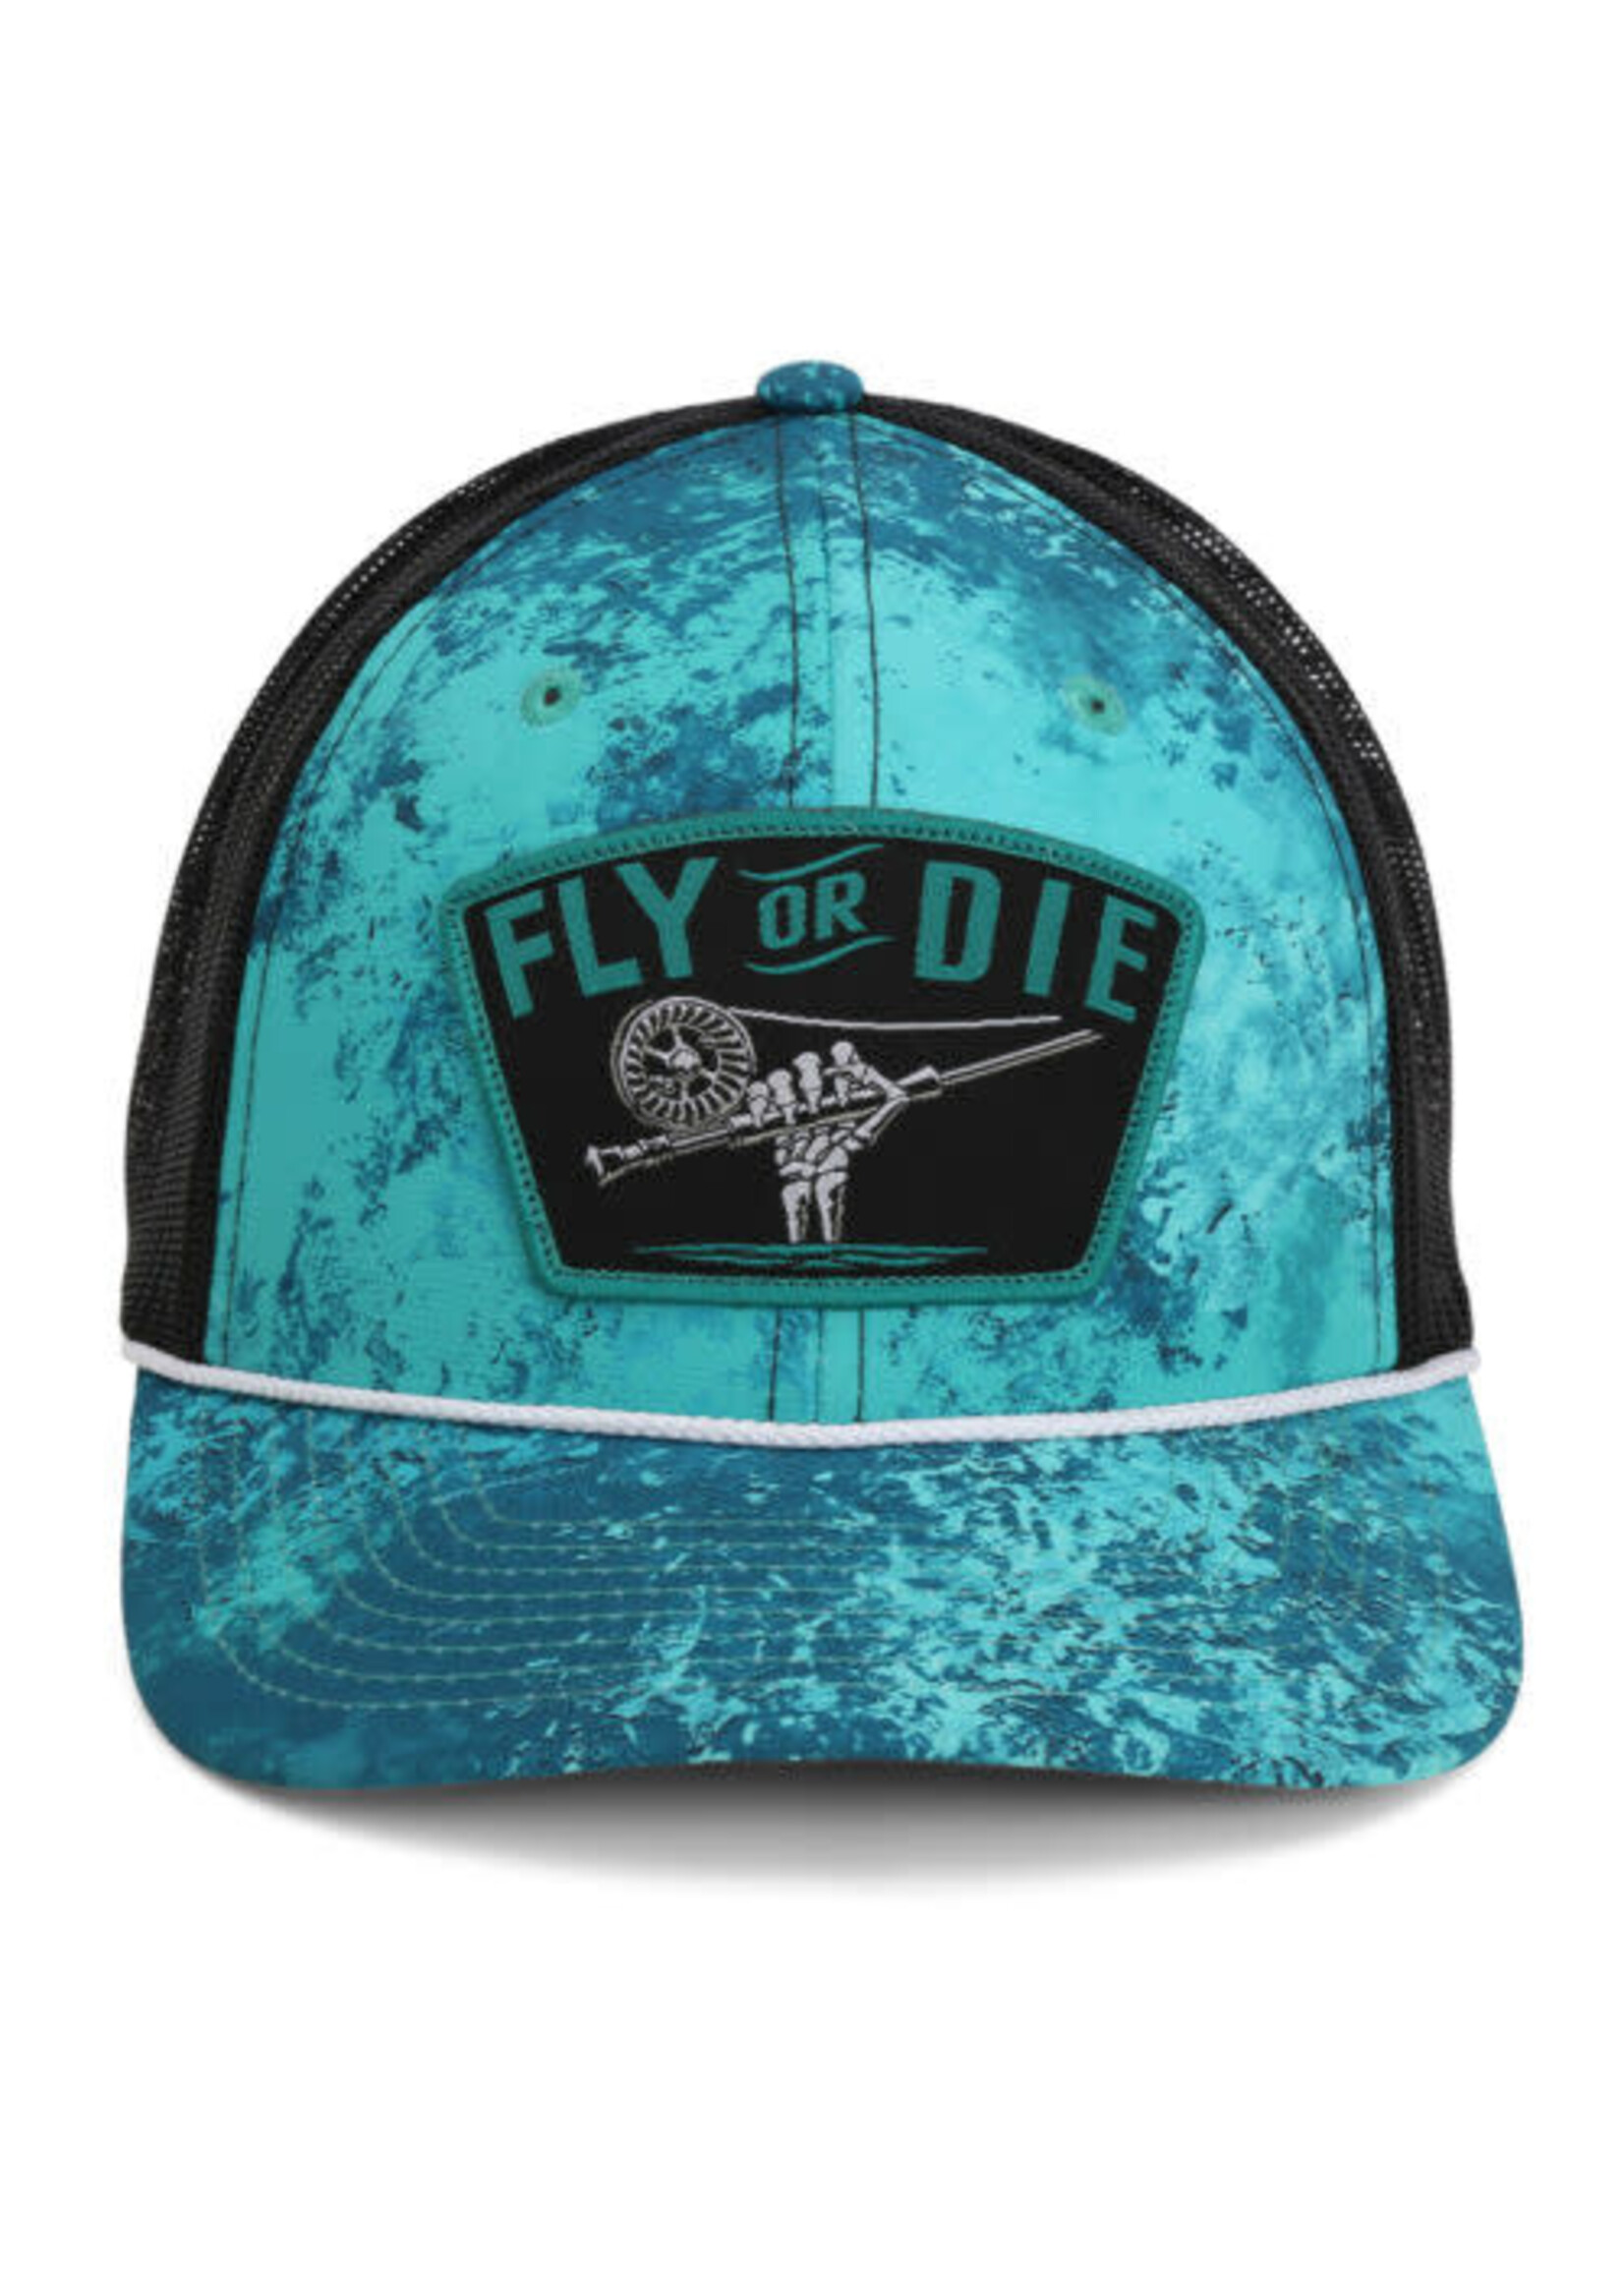 Paramount Fly or Die Hat Fly Fishing Mesh Back Rope Cap - Tackle Shack